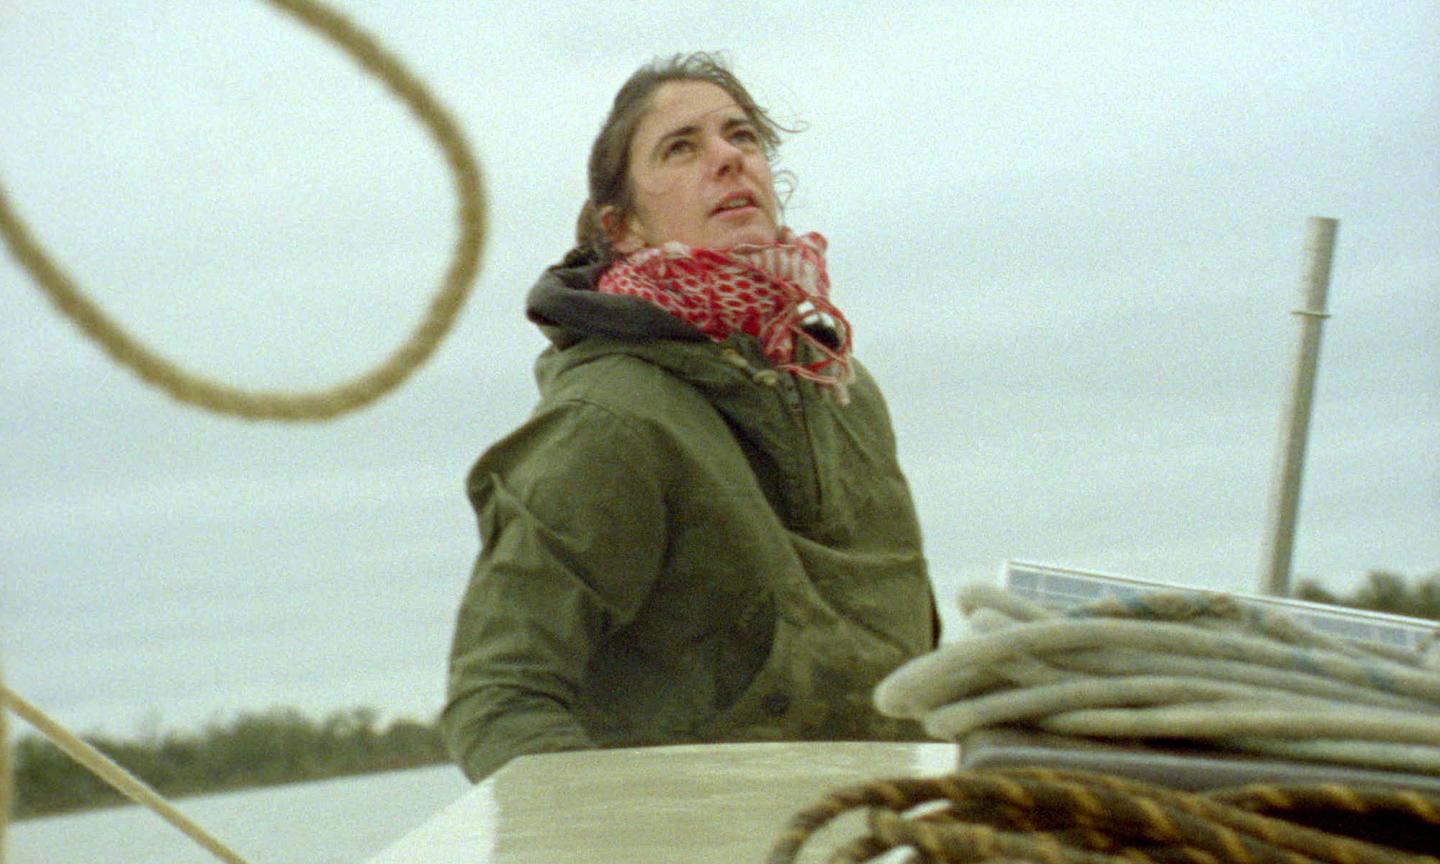 A woman, Rose Ravetz, standing on a boat wearing a green anorak and red scarf.